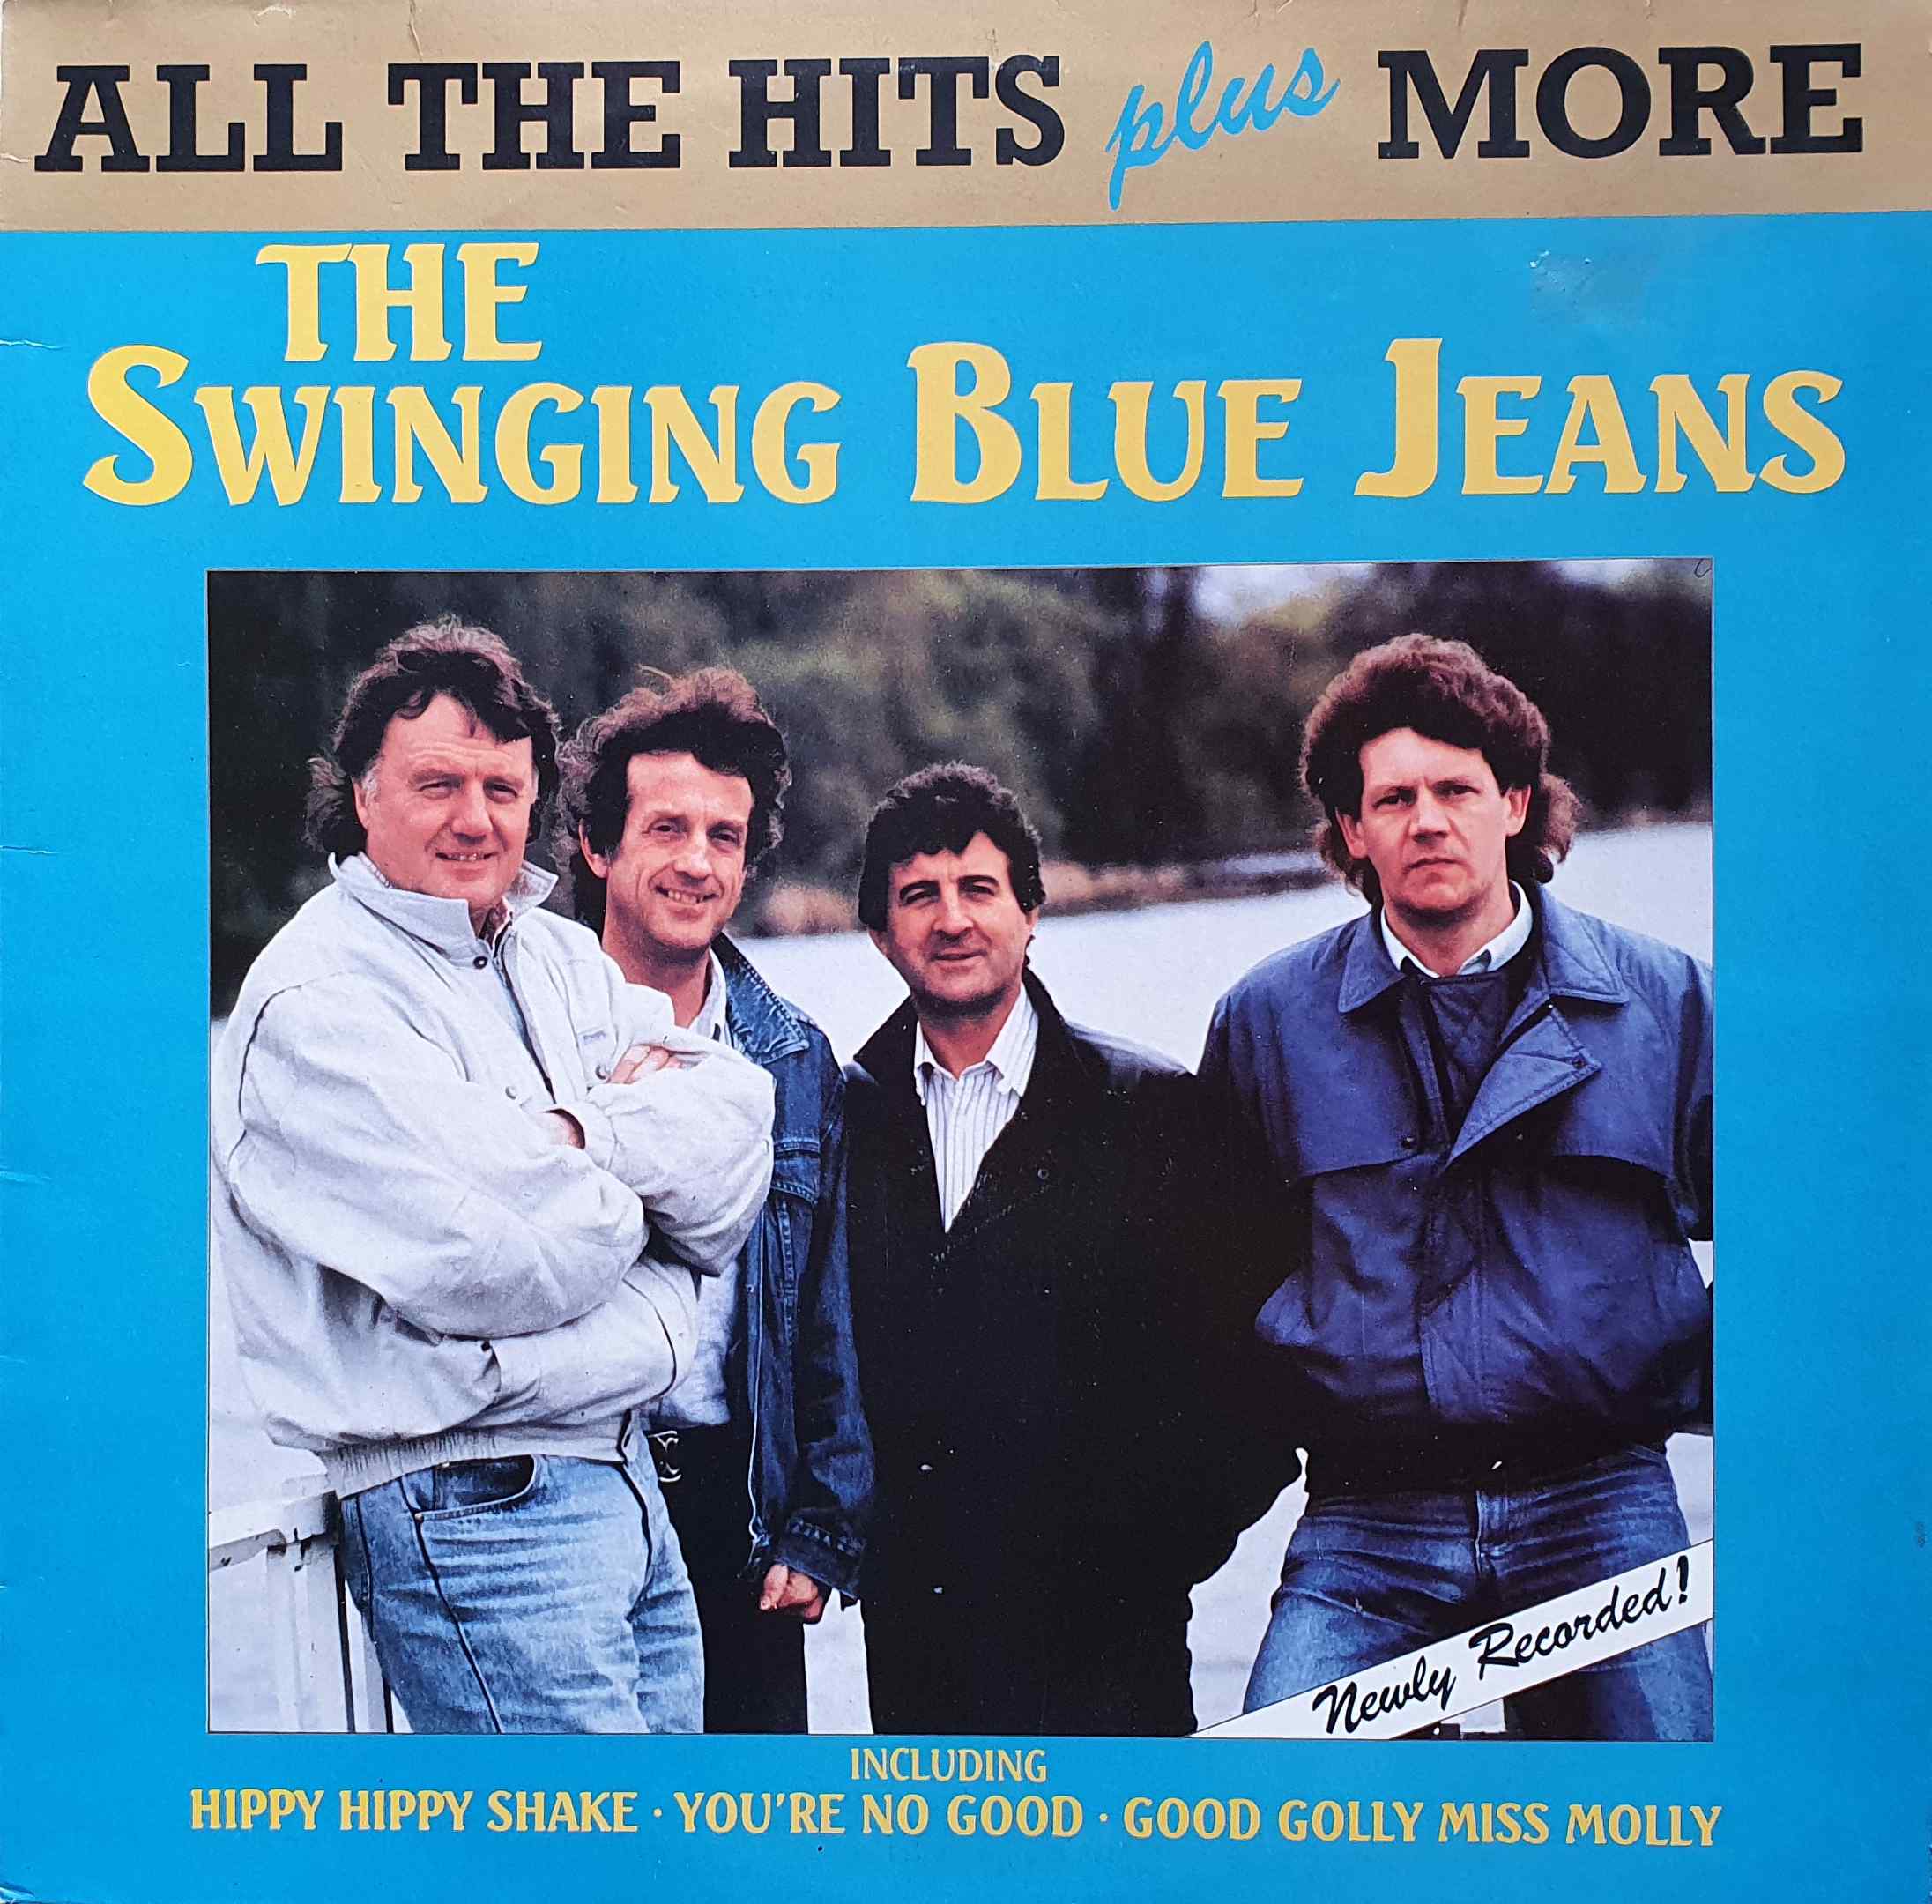 Picture of All the hits plus more by artist Swinging Blue Jeans from the BBC albums - Records and Tapes library